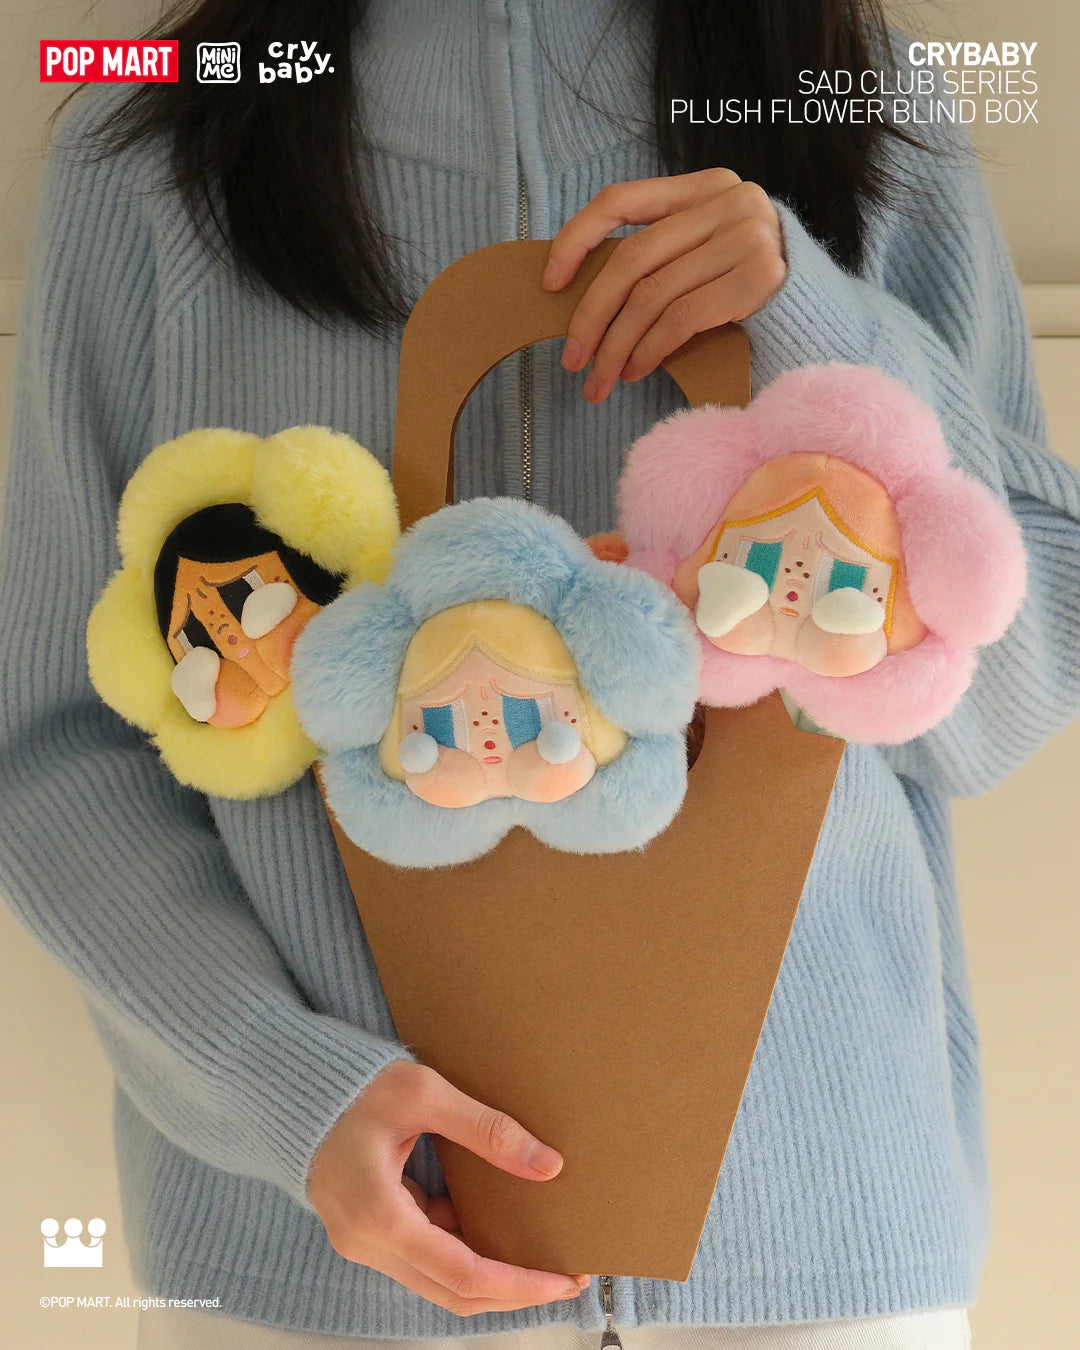 A woman holding a basket with CRYBABY Sad Club Series-Plush Flower Blind Box stuffed toys.